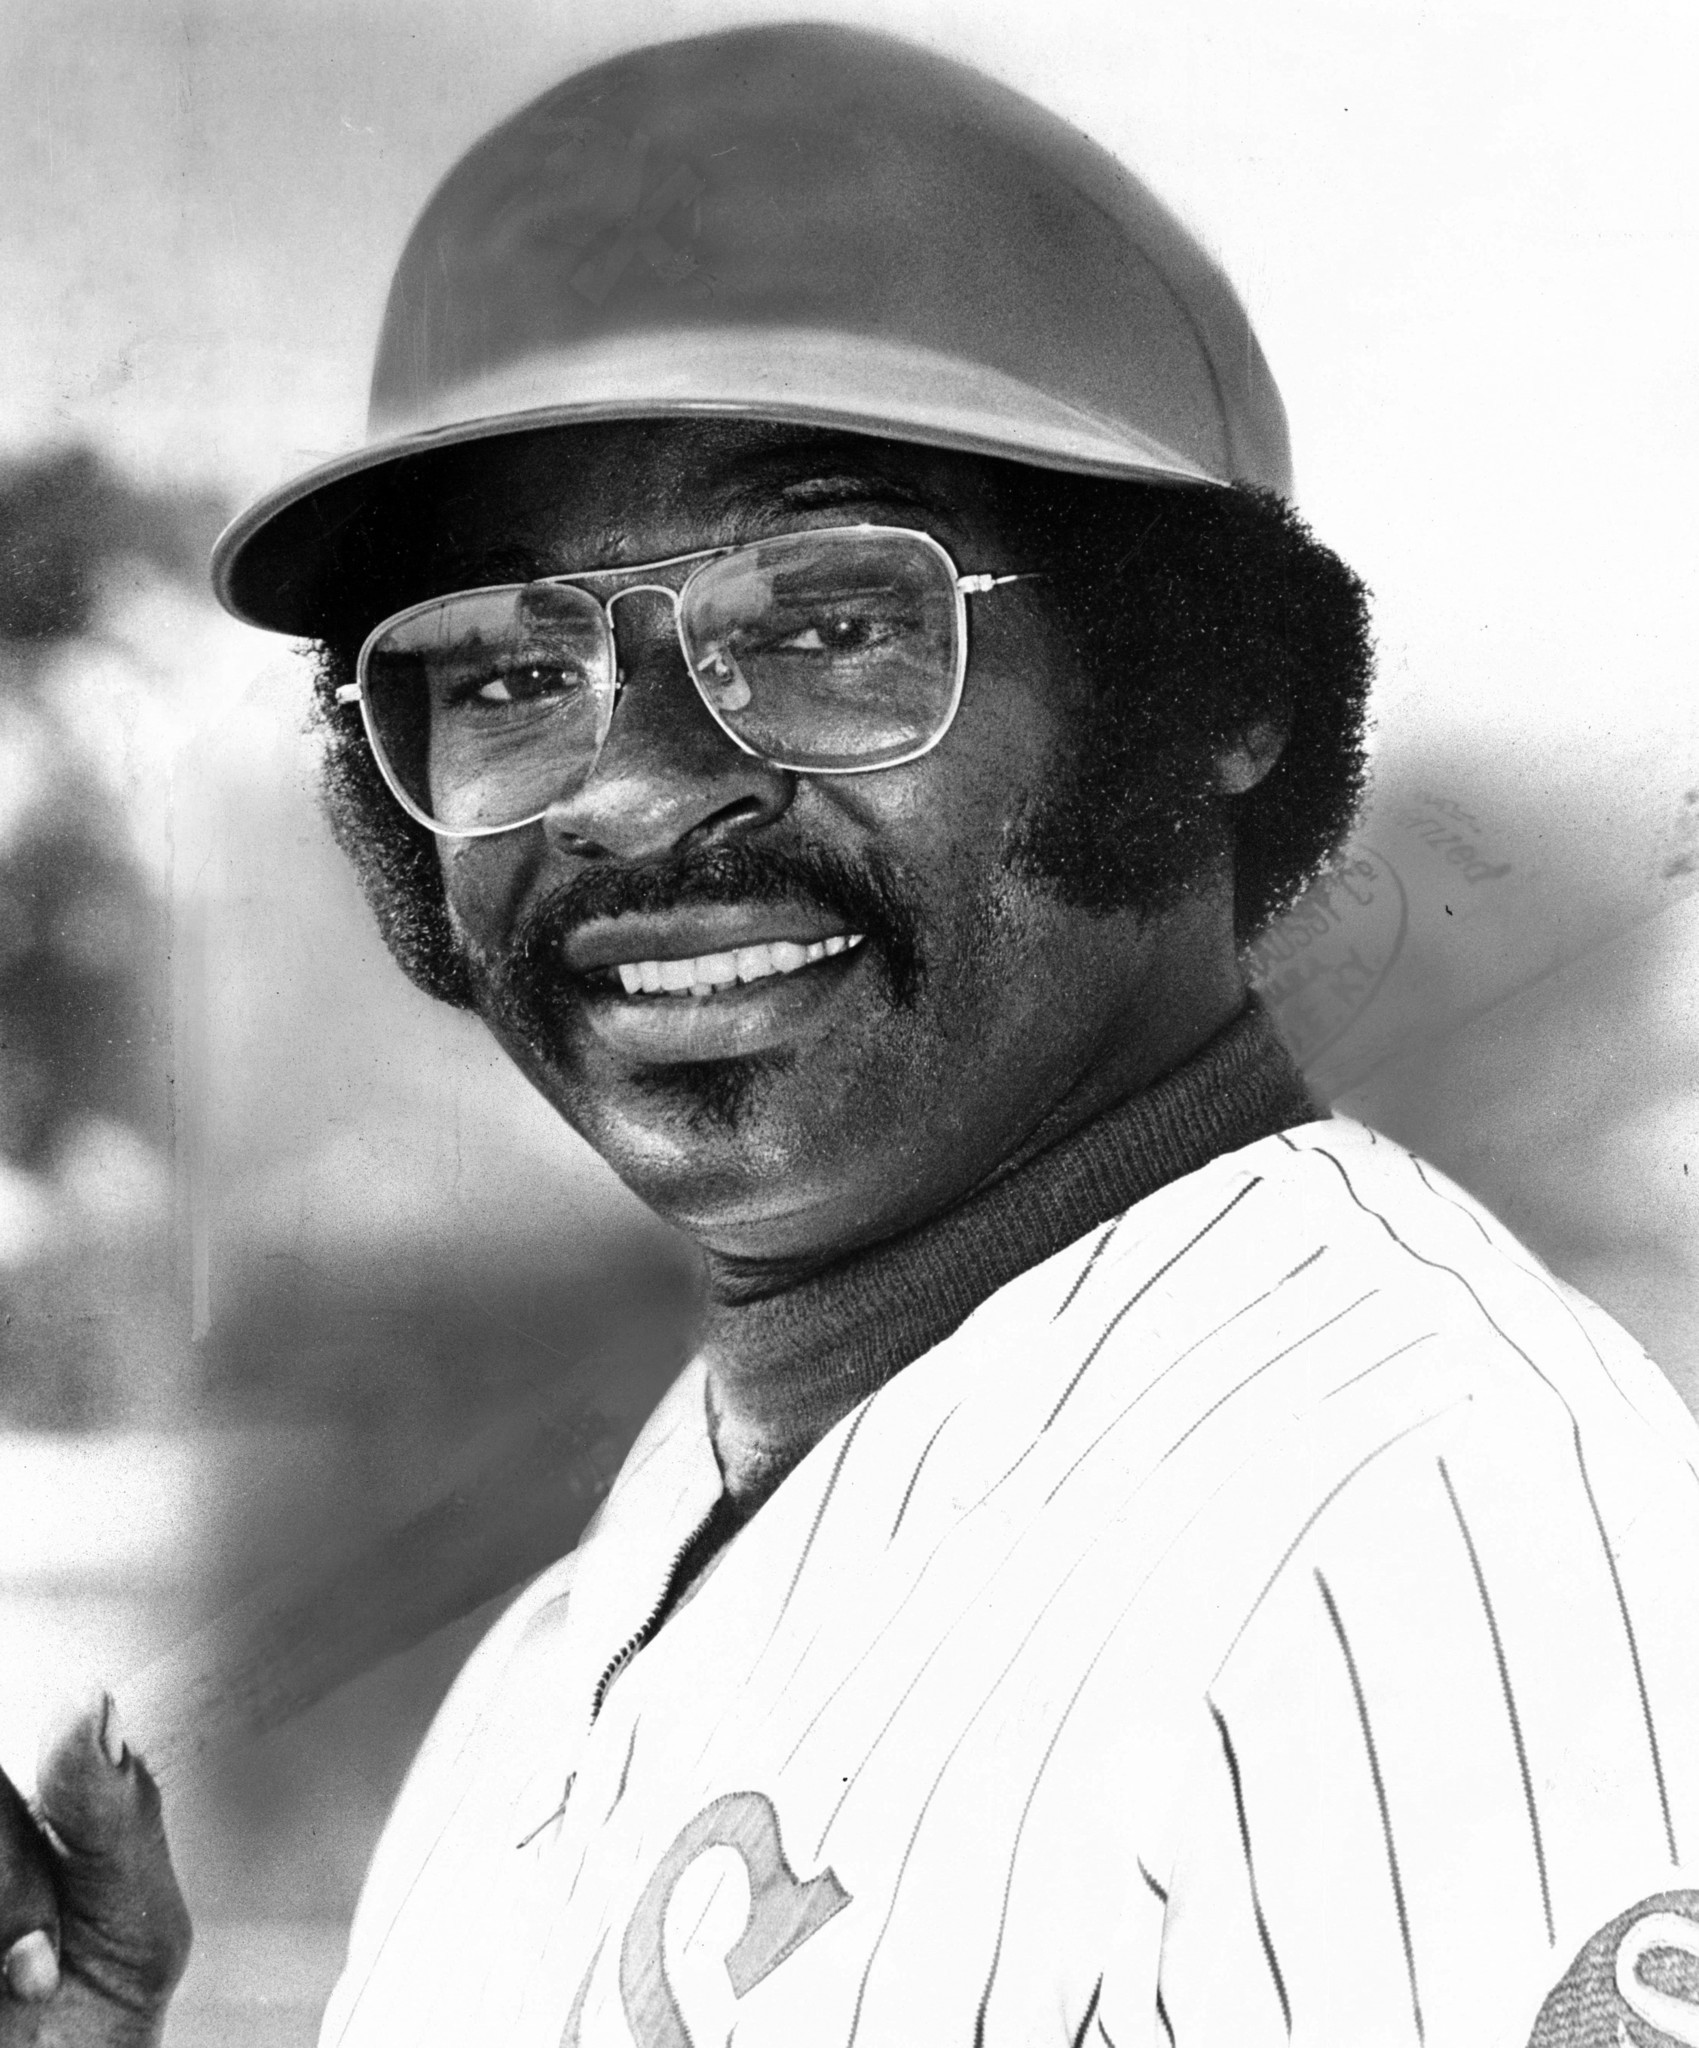 White Sox Great Dick Allen Dies At Age Of 78 - CBS Chicago